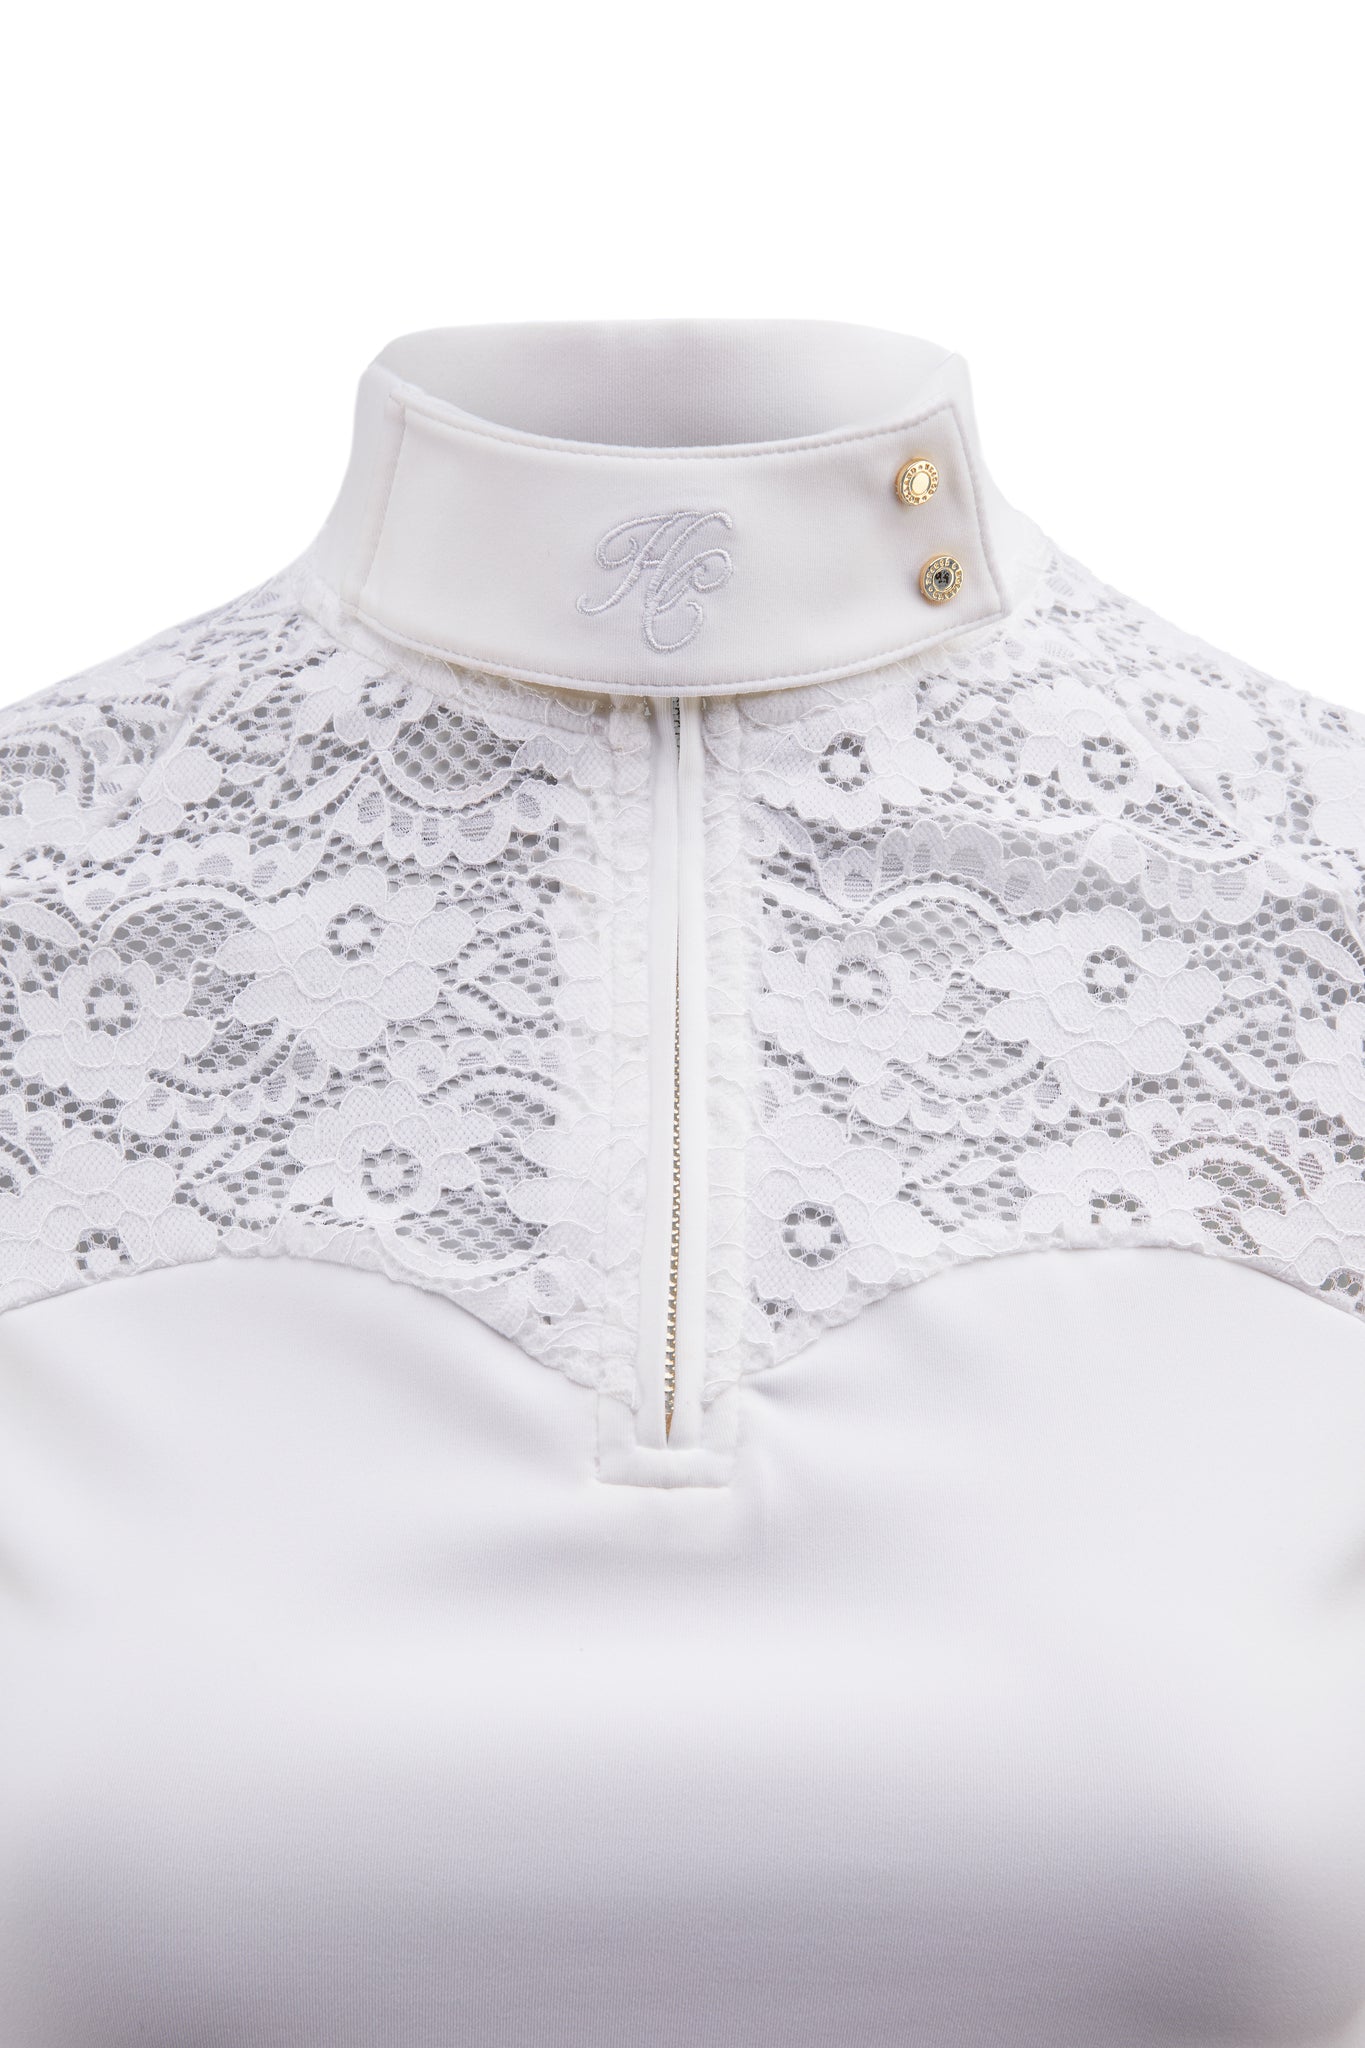 embroidery detail on front of turtle neck on white turtle neck short sleeve base layer with lace across shoulders and a sweetheart neckline 